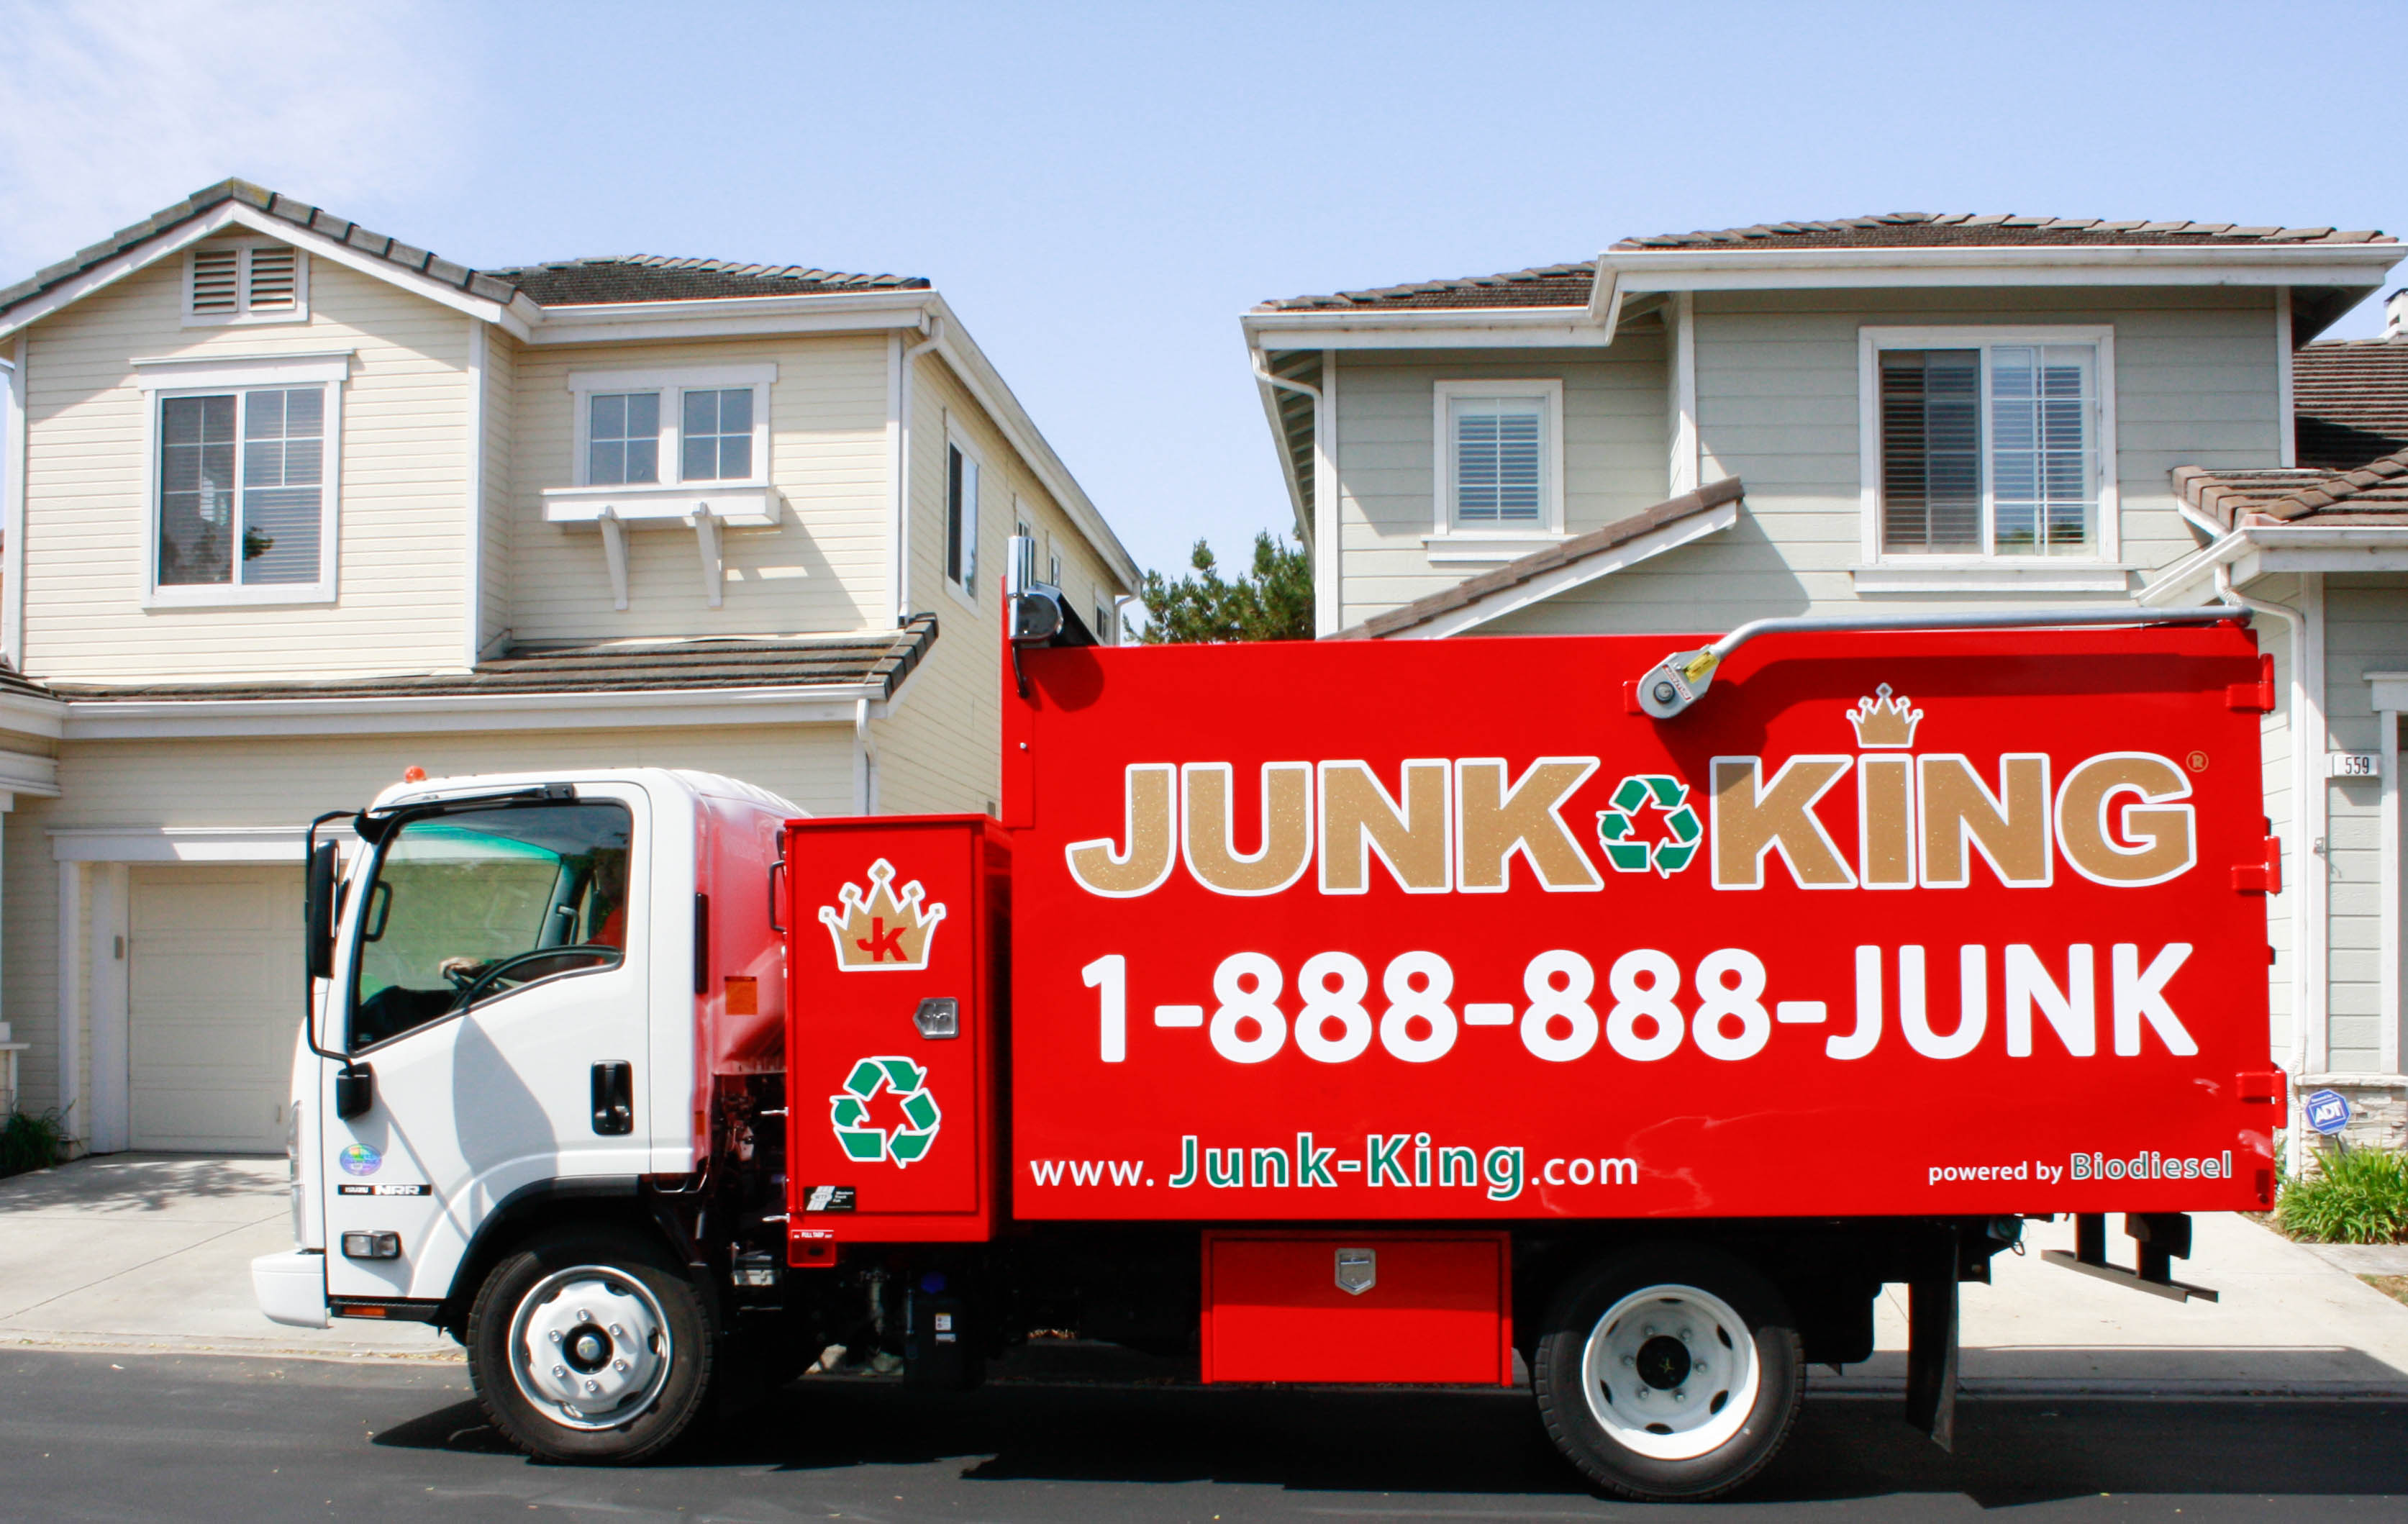 Junk King Chicago West Suburbs Logo